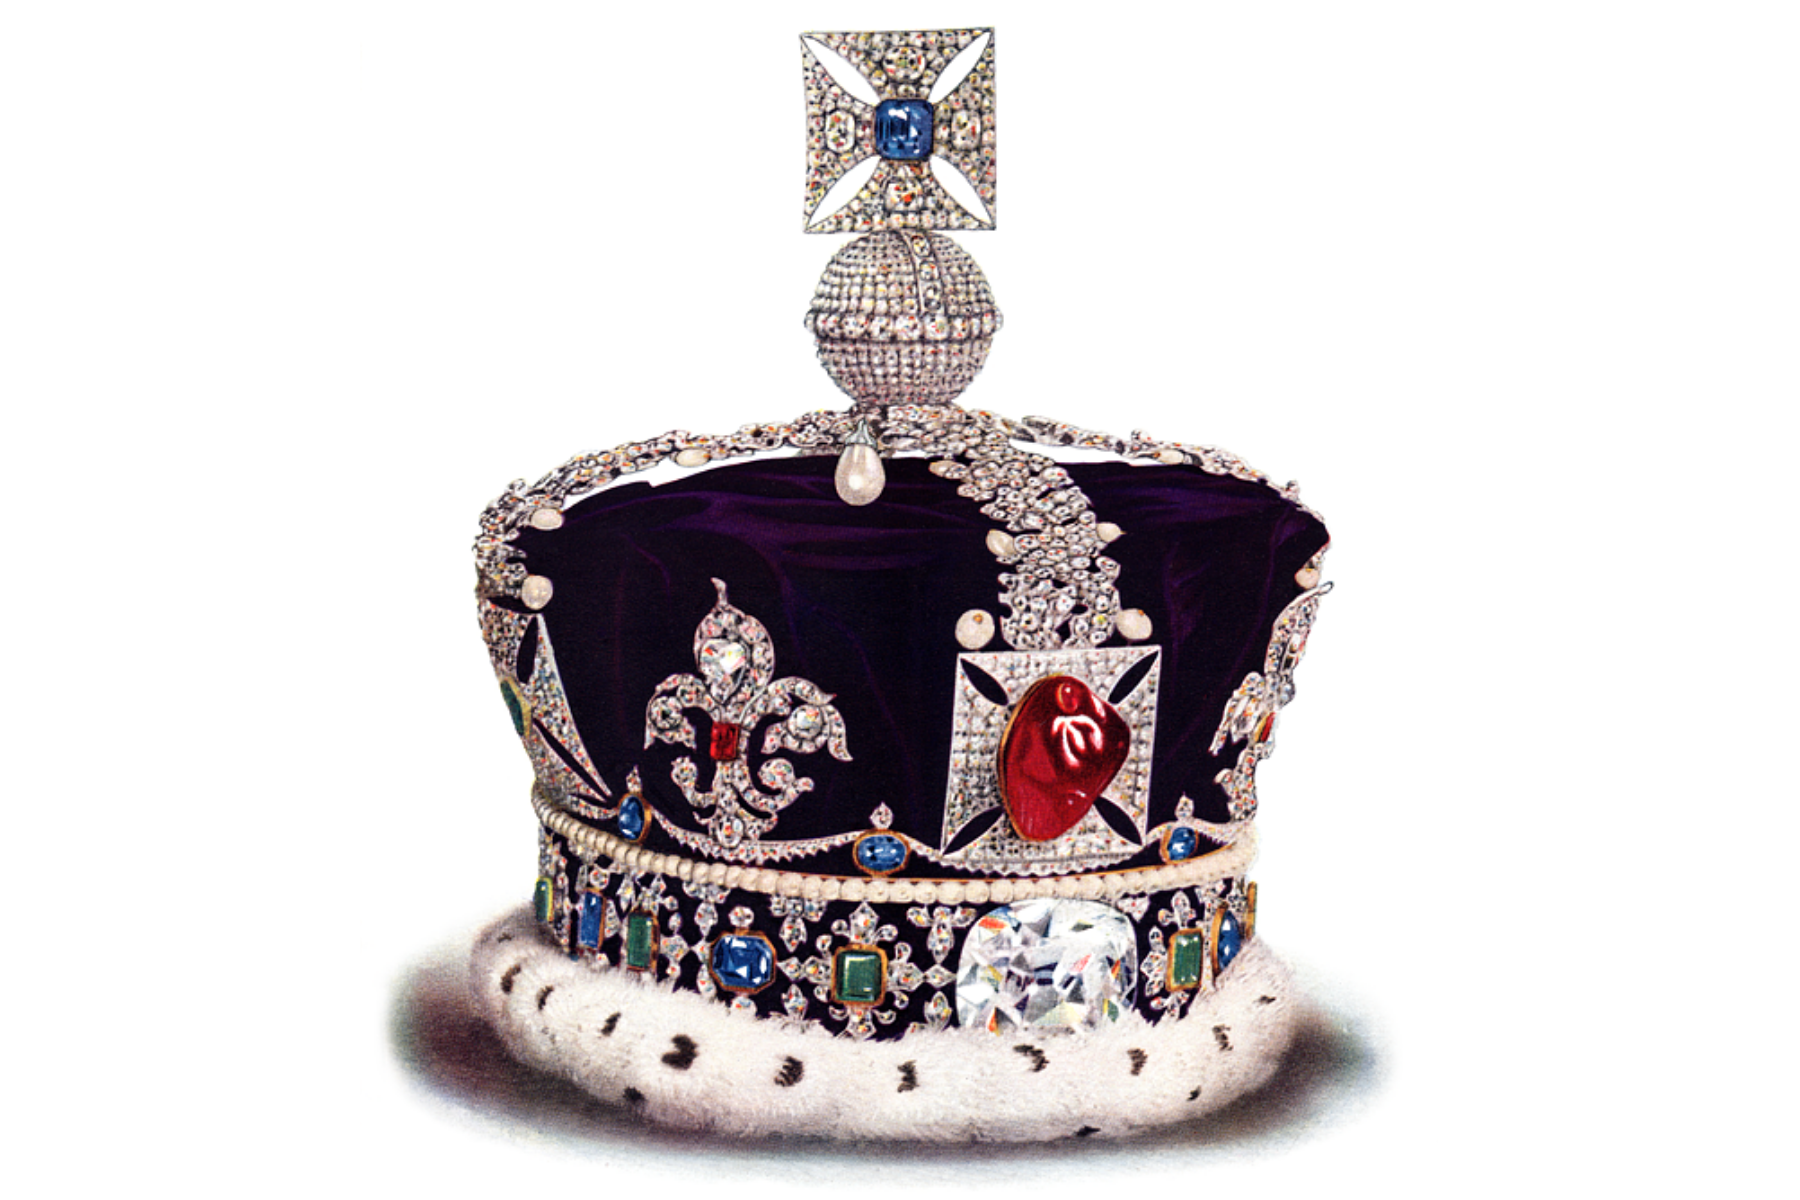 The imperial state crown